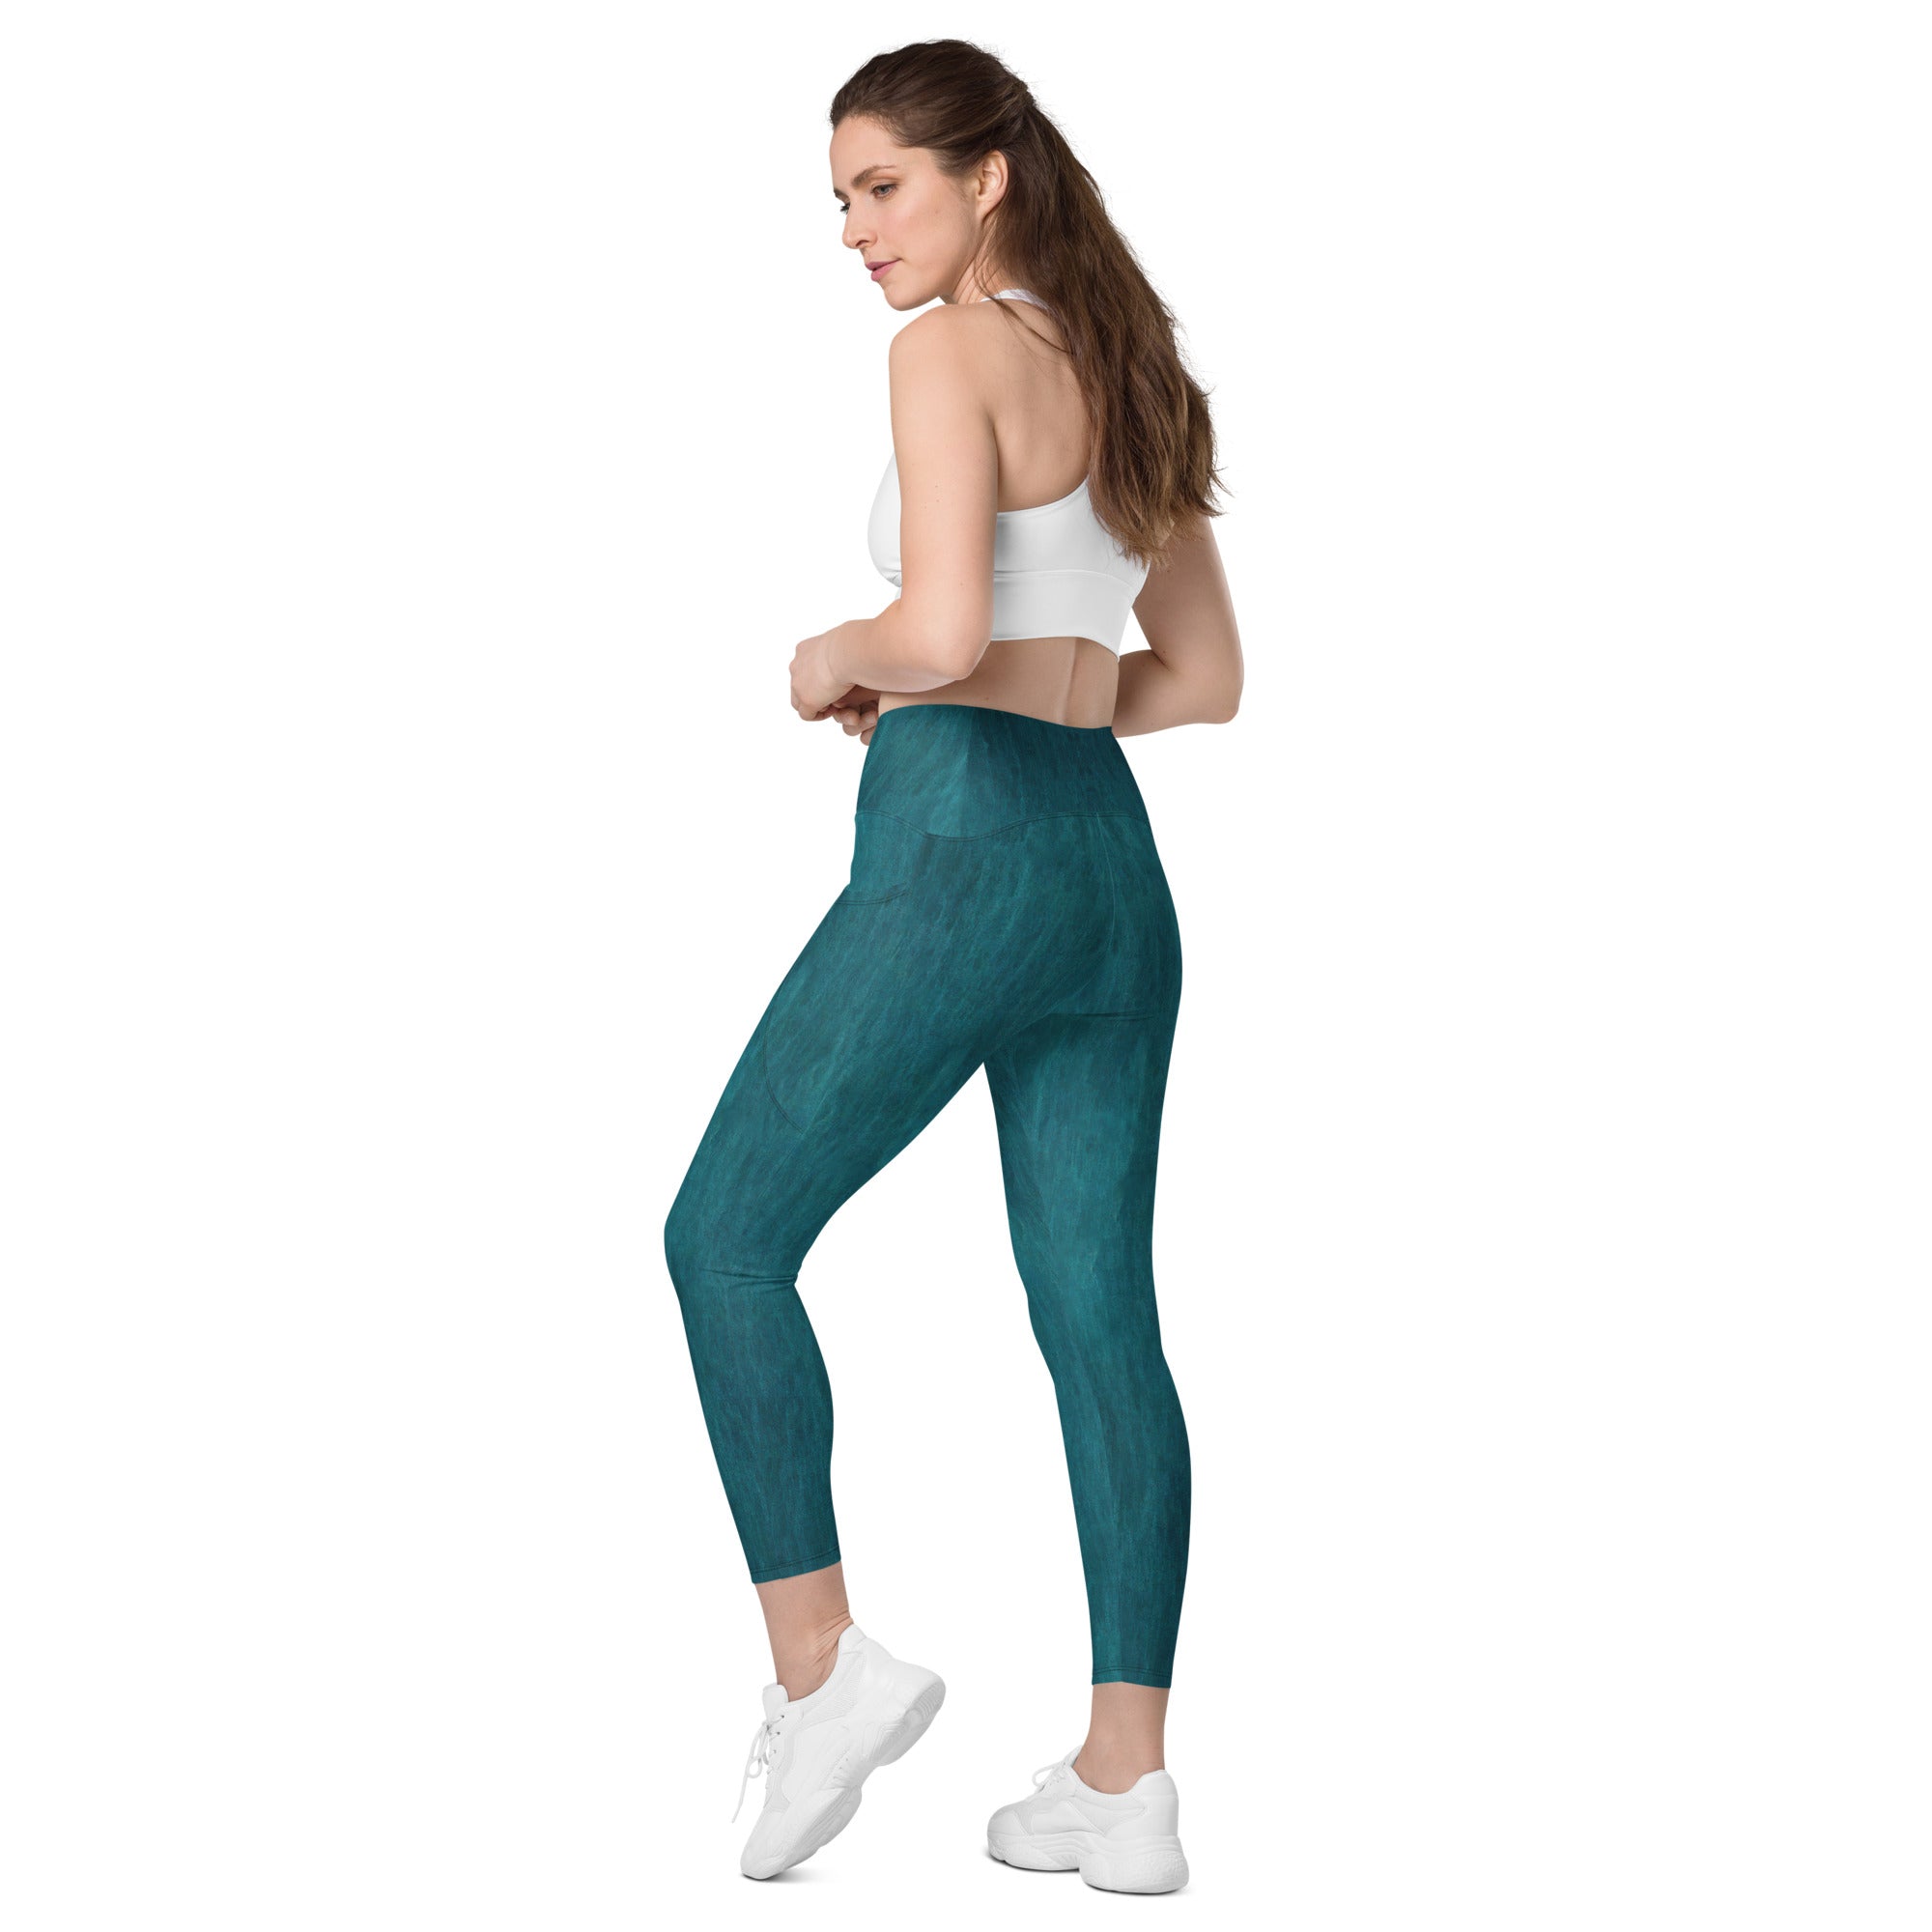 Detailed Texture of Cloud Nine Crossover Leggings Material